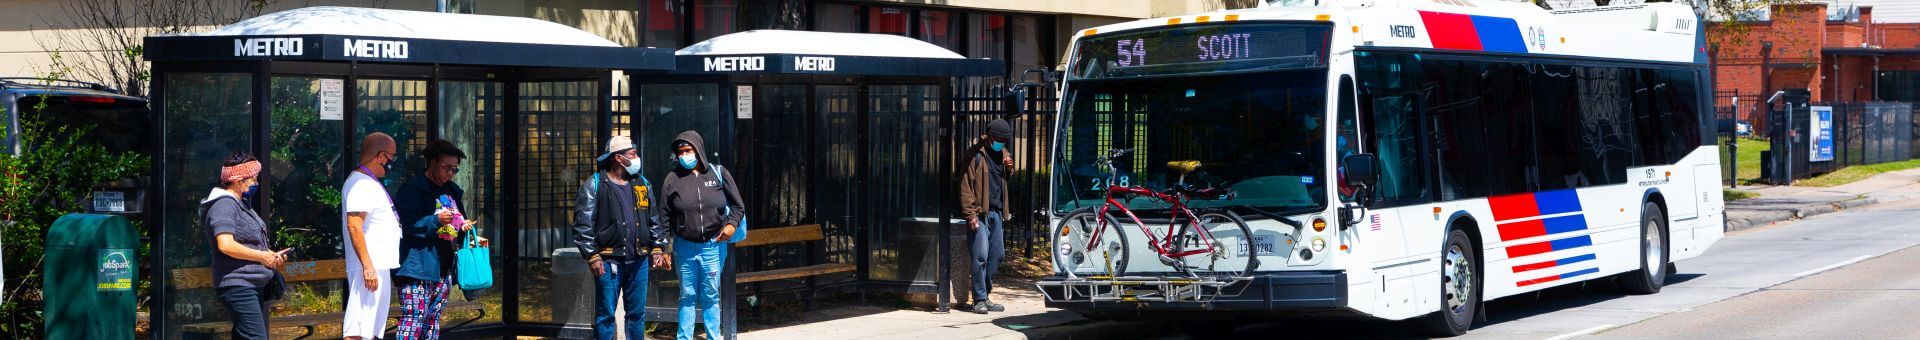 Customers waiting at METRO bus shelters as 54 Scott bus arrives